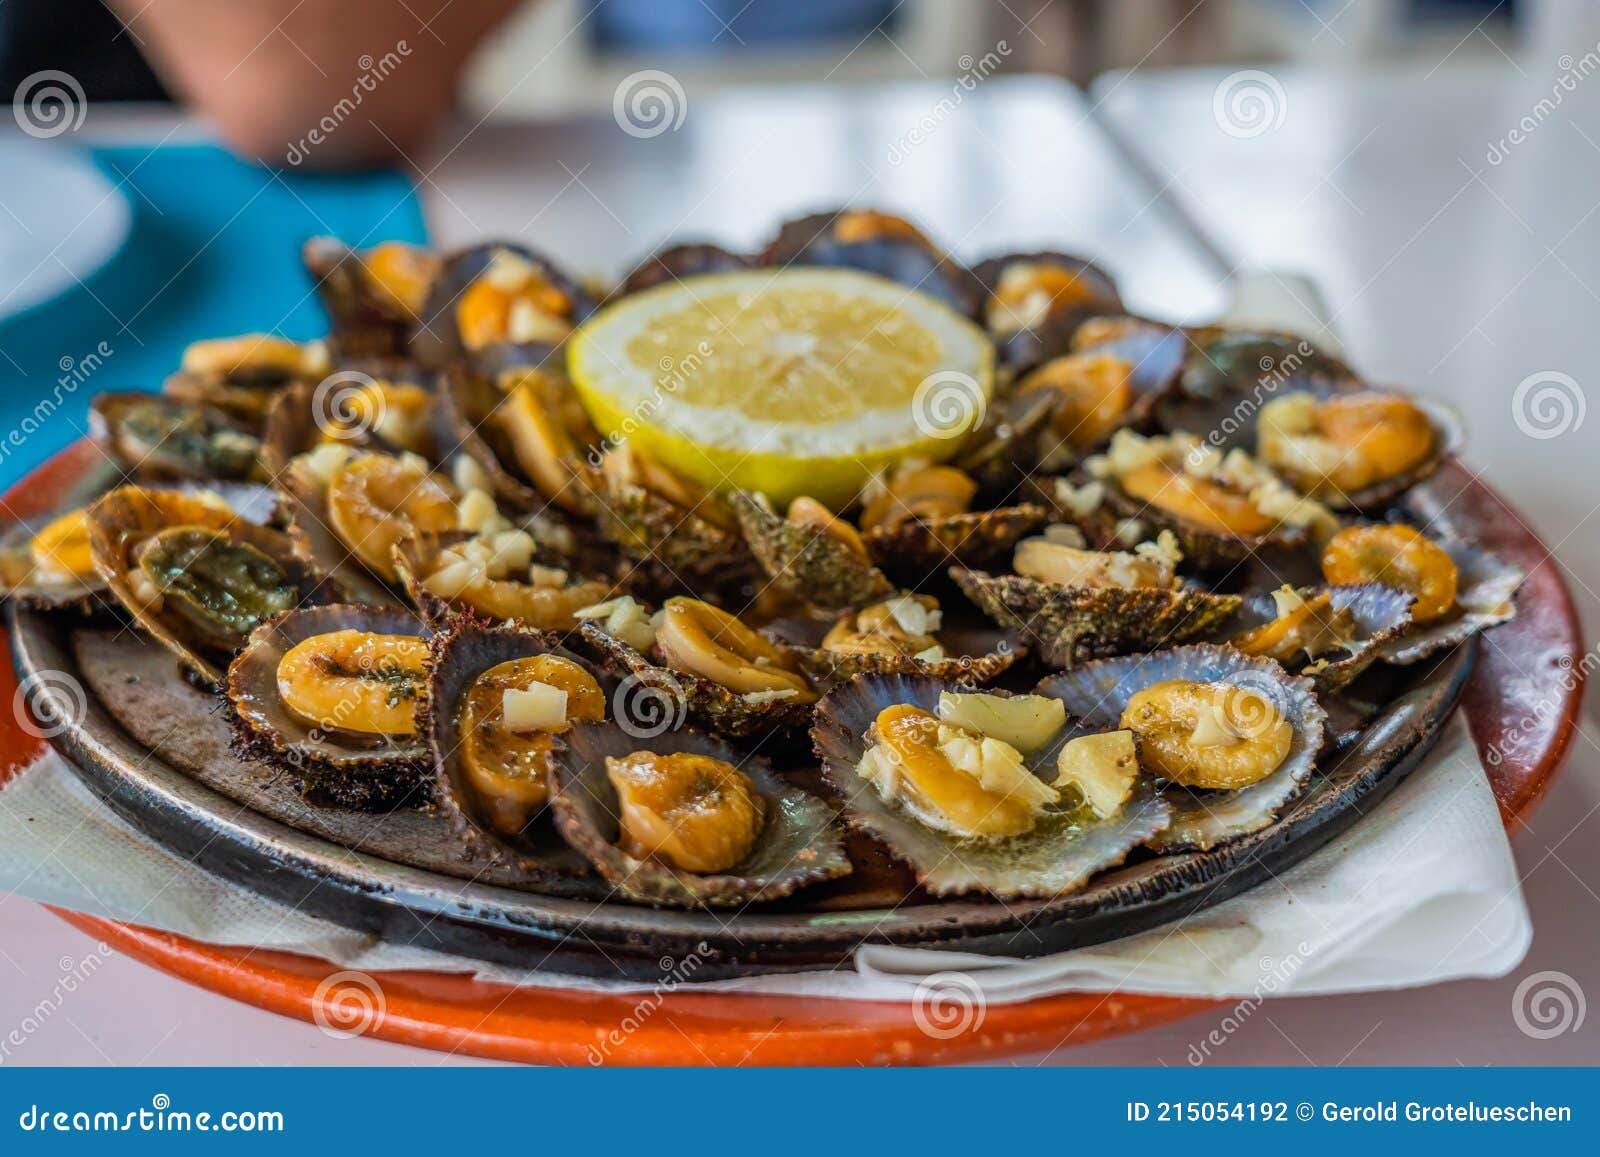 seafood - grilled limpets served with lemon. lapas grelhadas